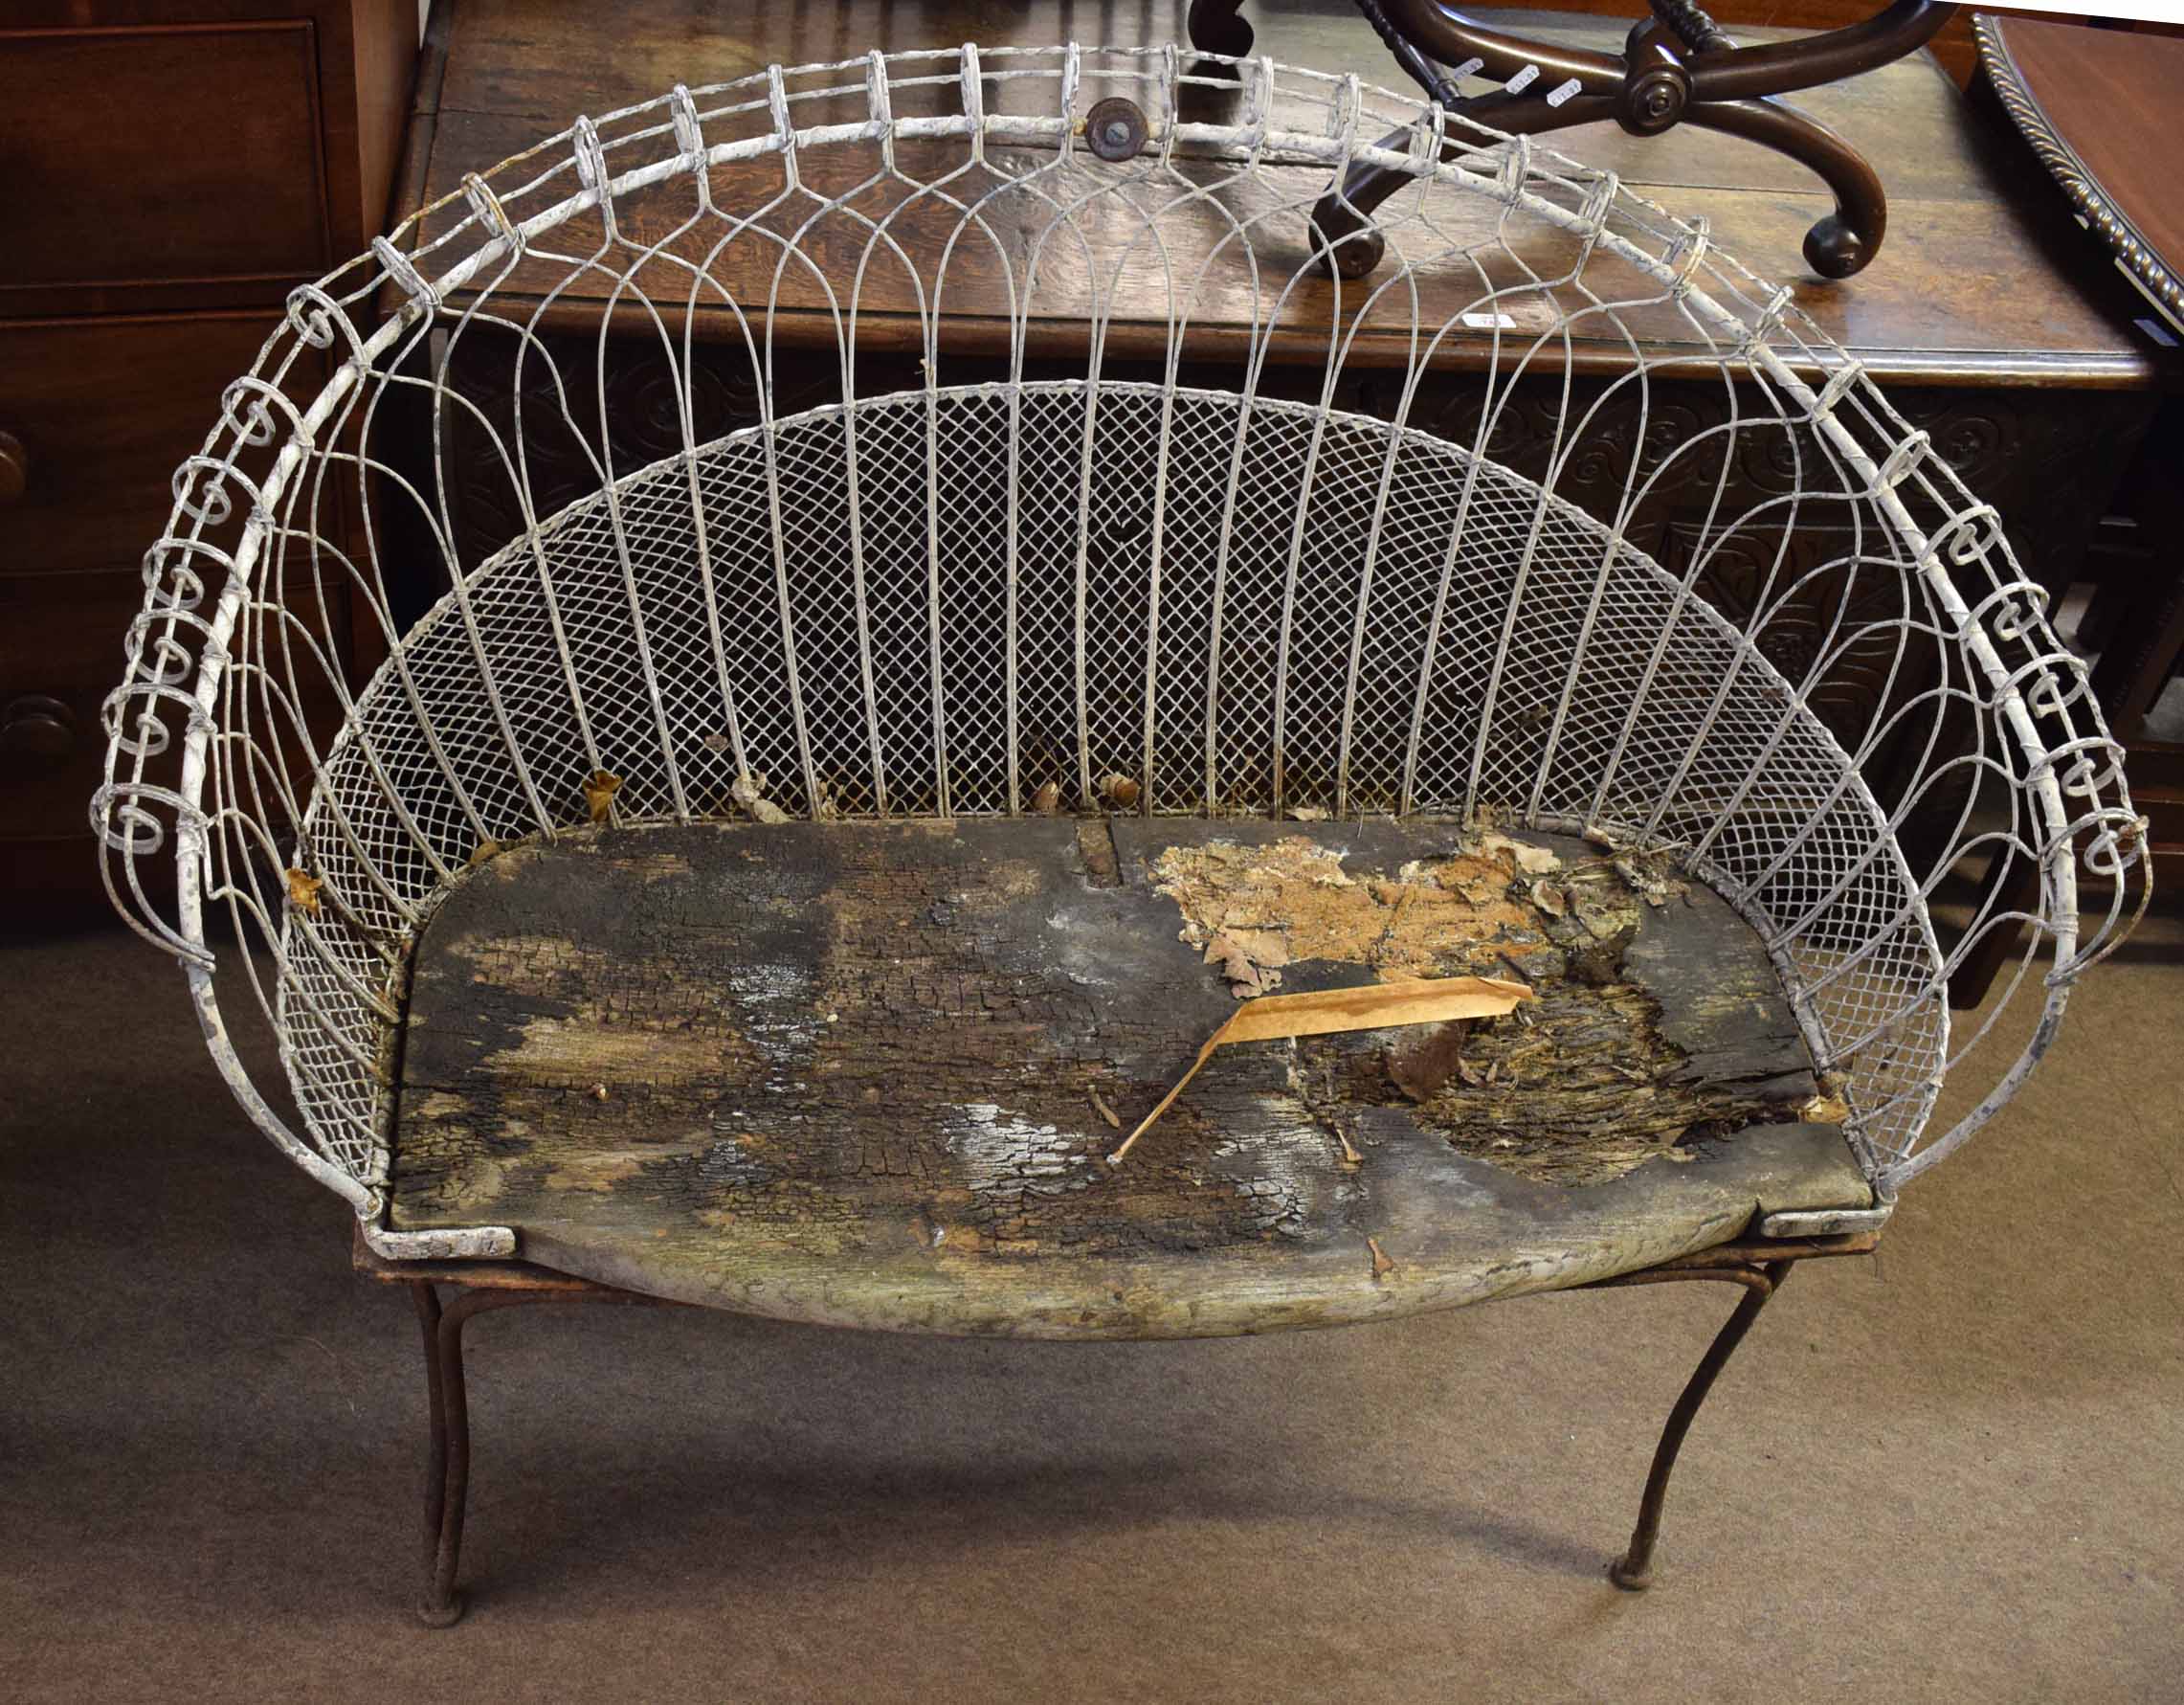 Victorian wire work garden seat on cabriole legs with metal lattice work and hooped rail, the seat